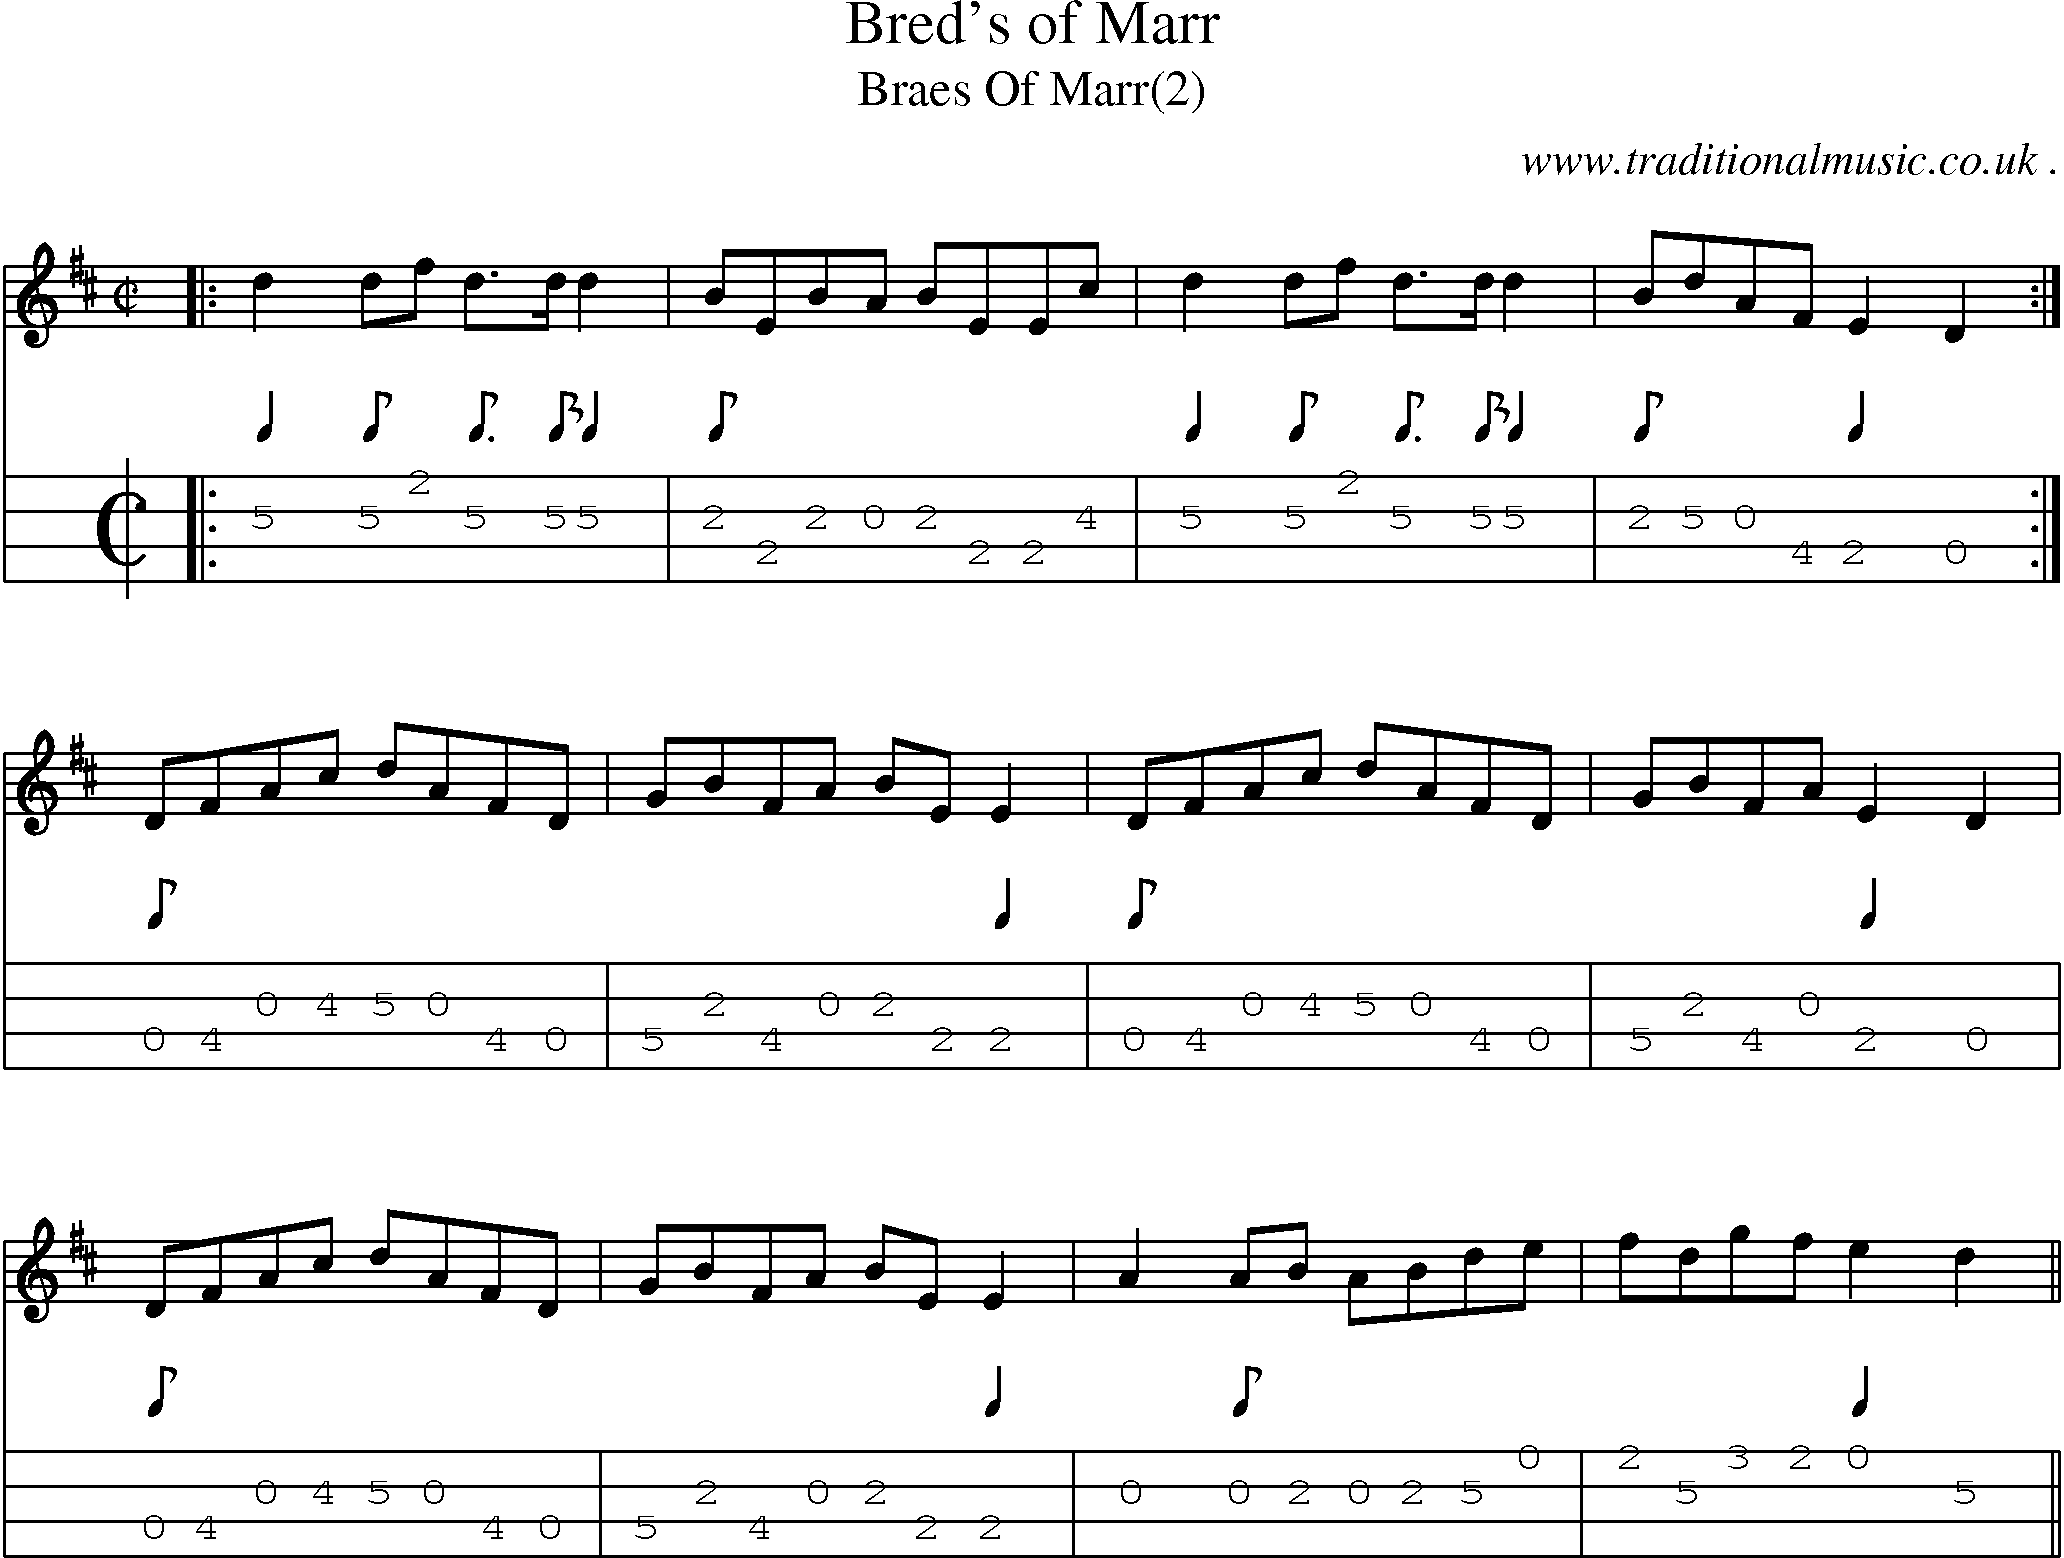 Sheet-Music and Mandolin Tabs for Breds Of Marr